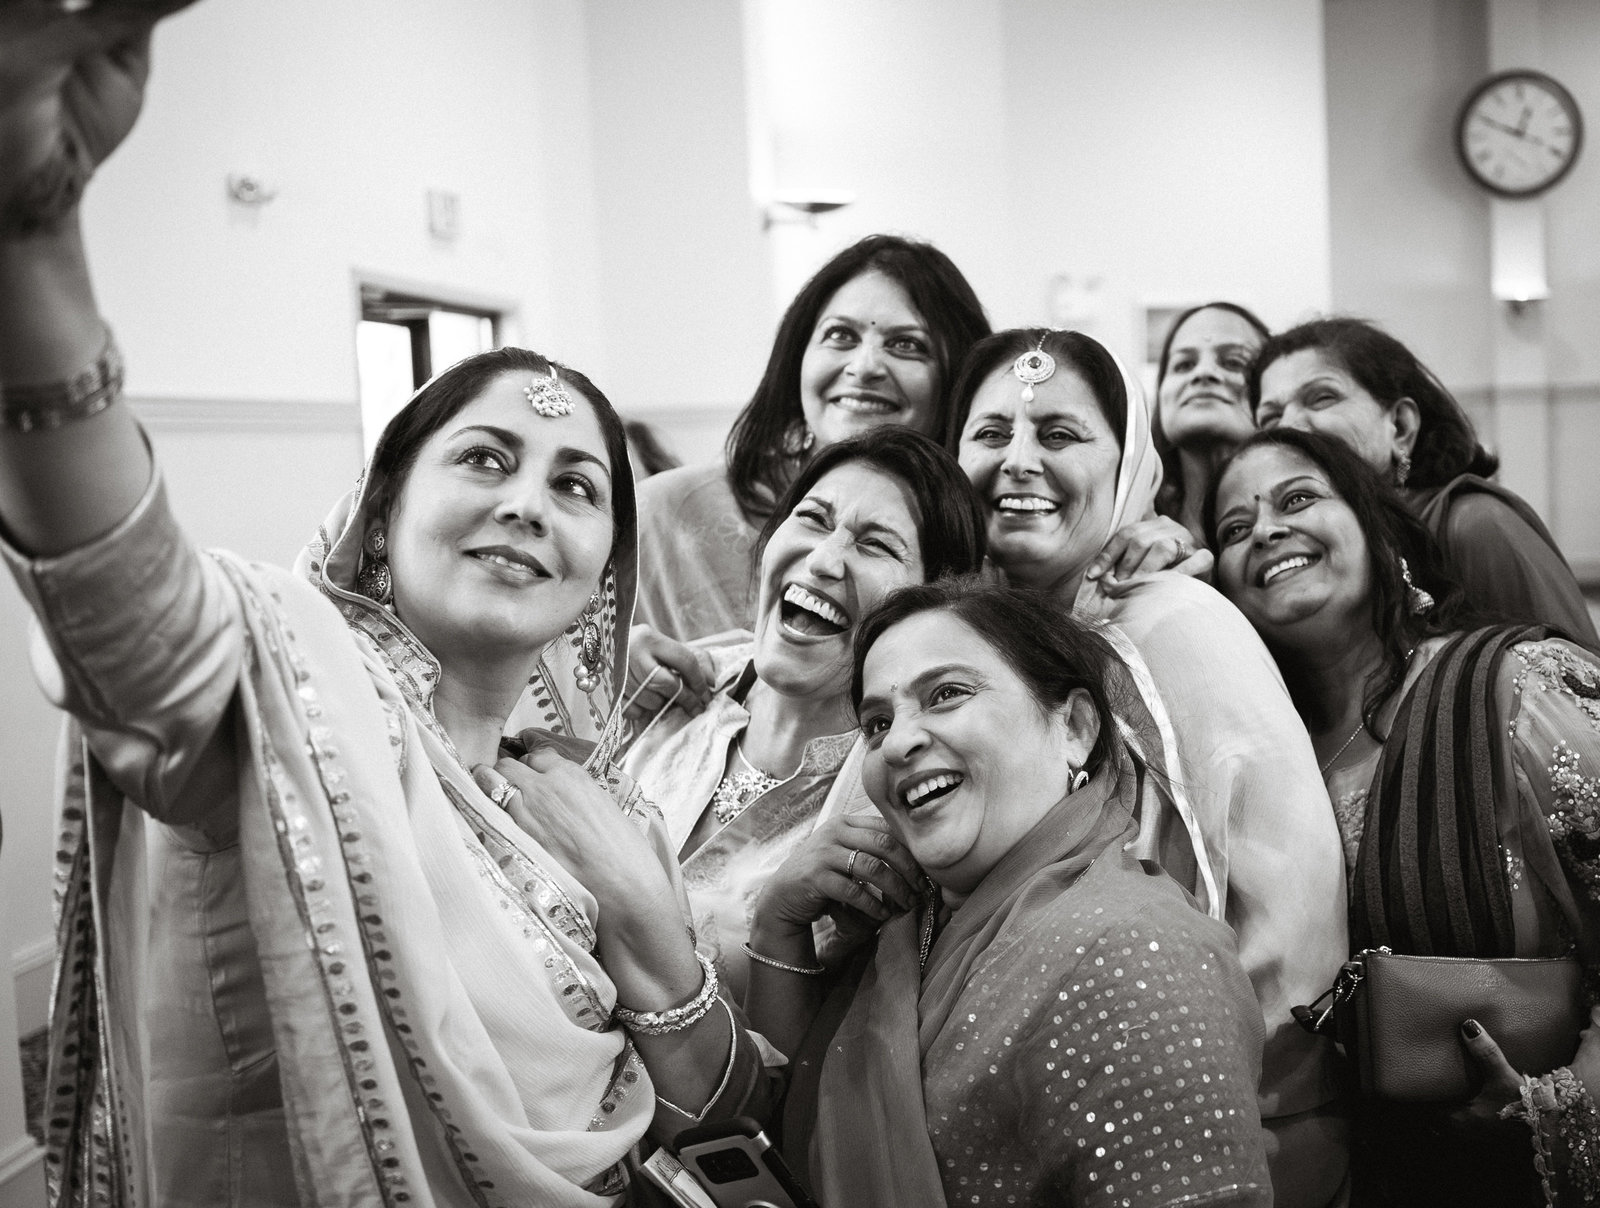 Fun candid of family members and wedding guests at the Indian part of this two day celebration.